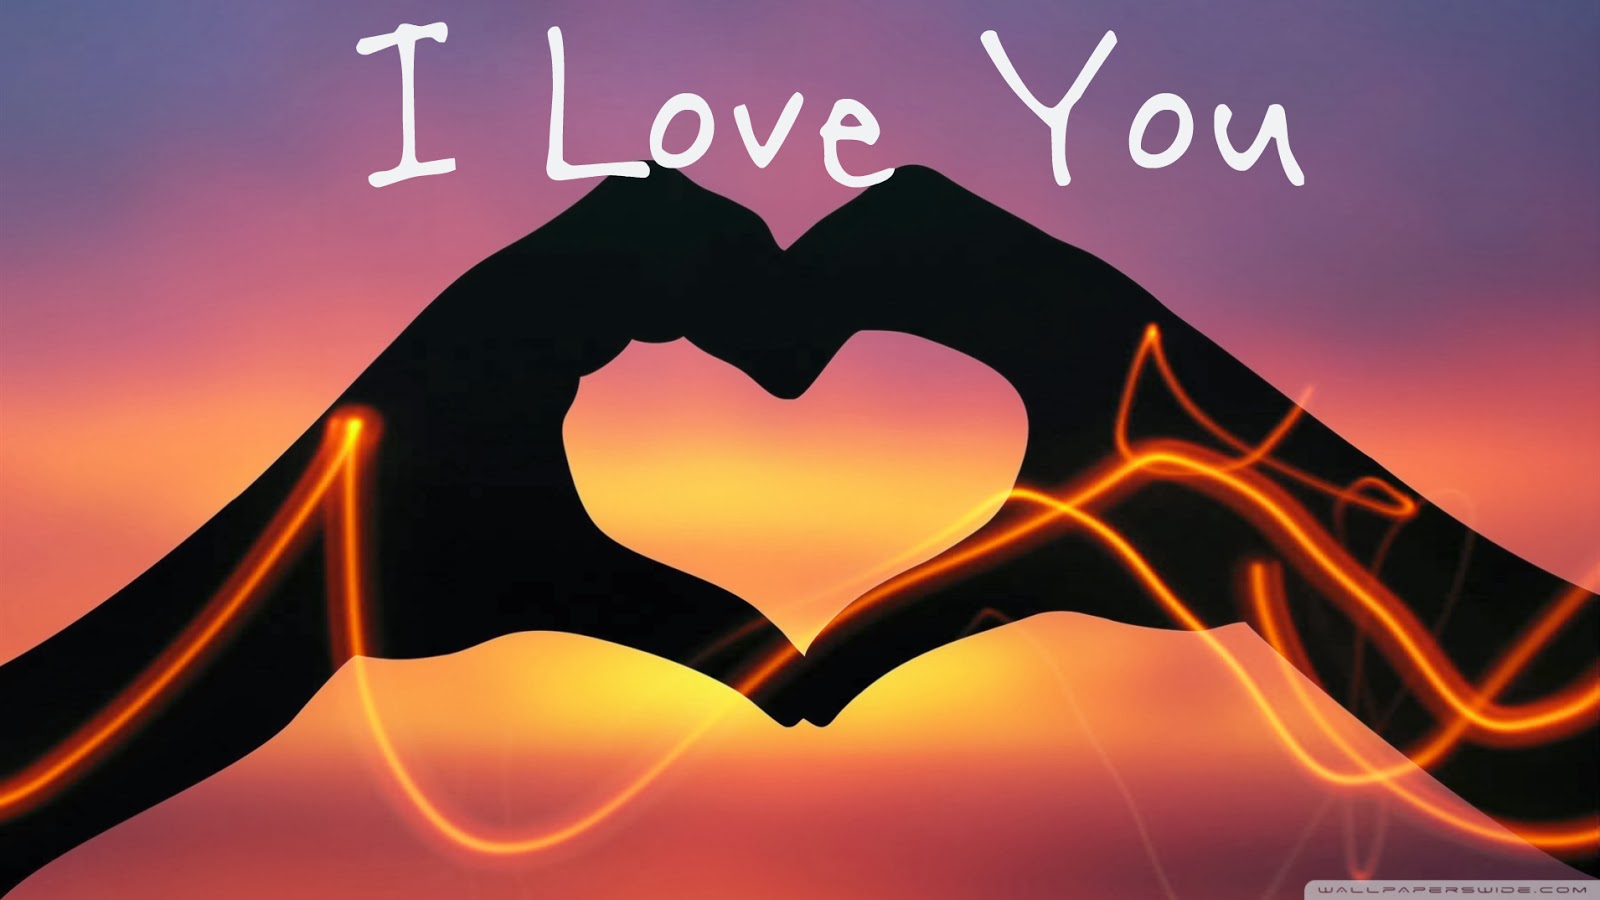 i-love-you-wallpaper-download (1) - Funny And Amazing Wallpapers.